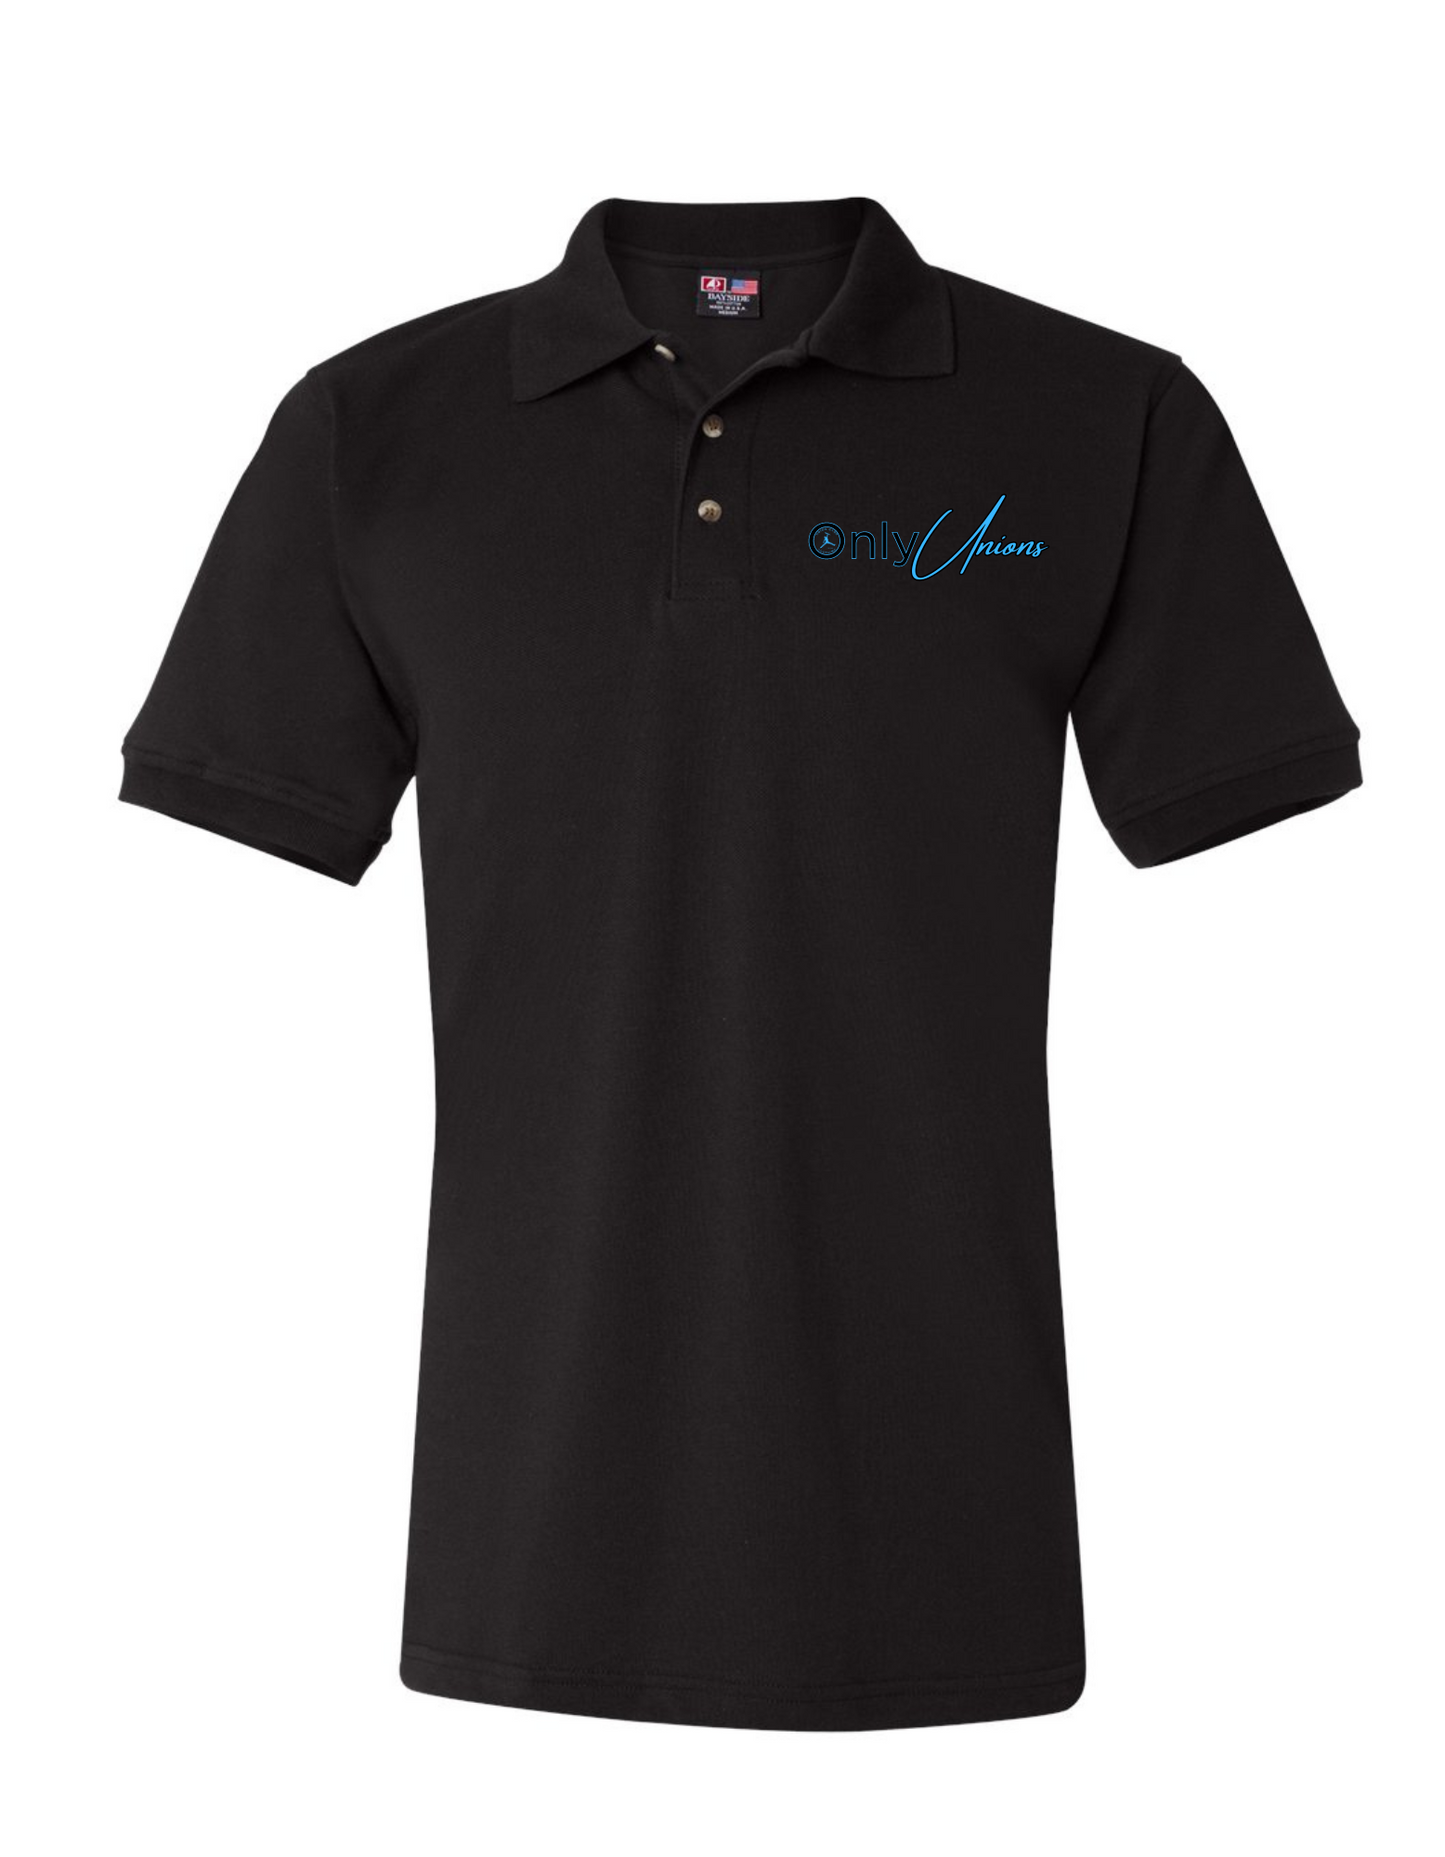 "ONLY UNIONS" Mens polo